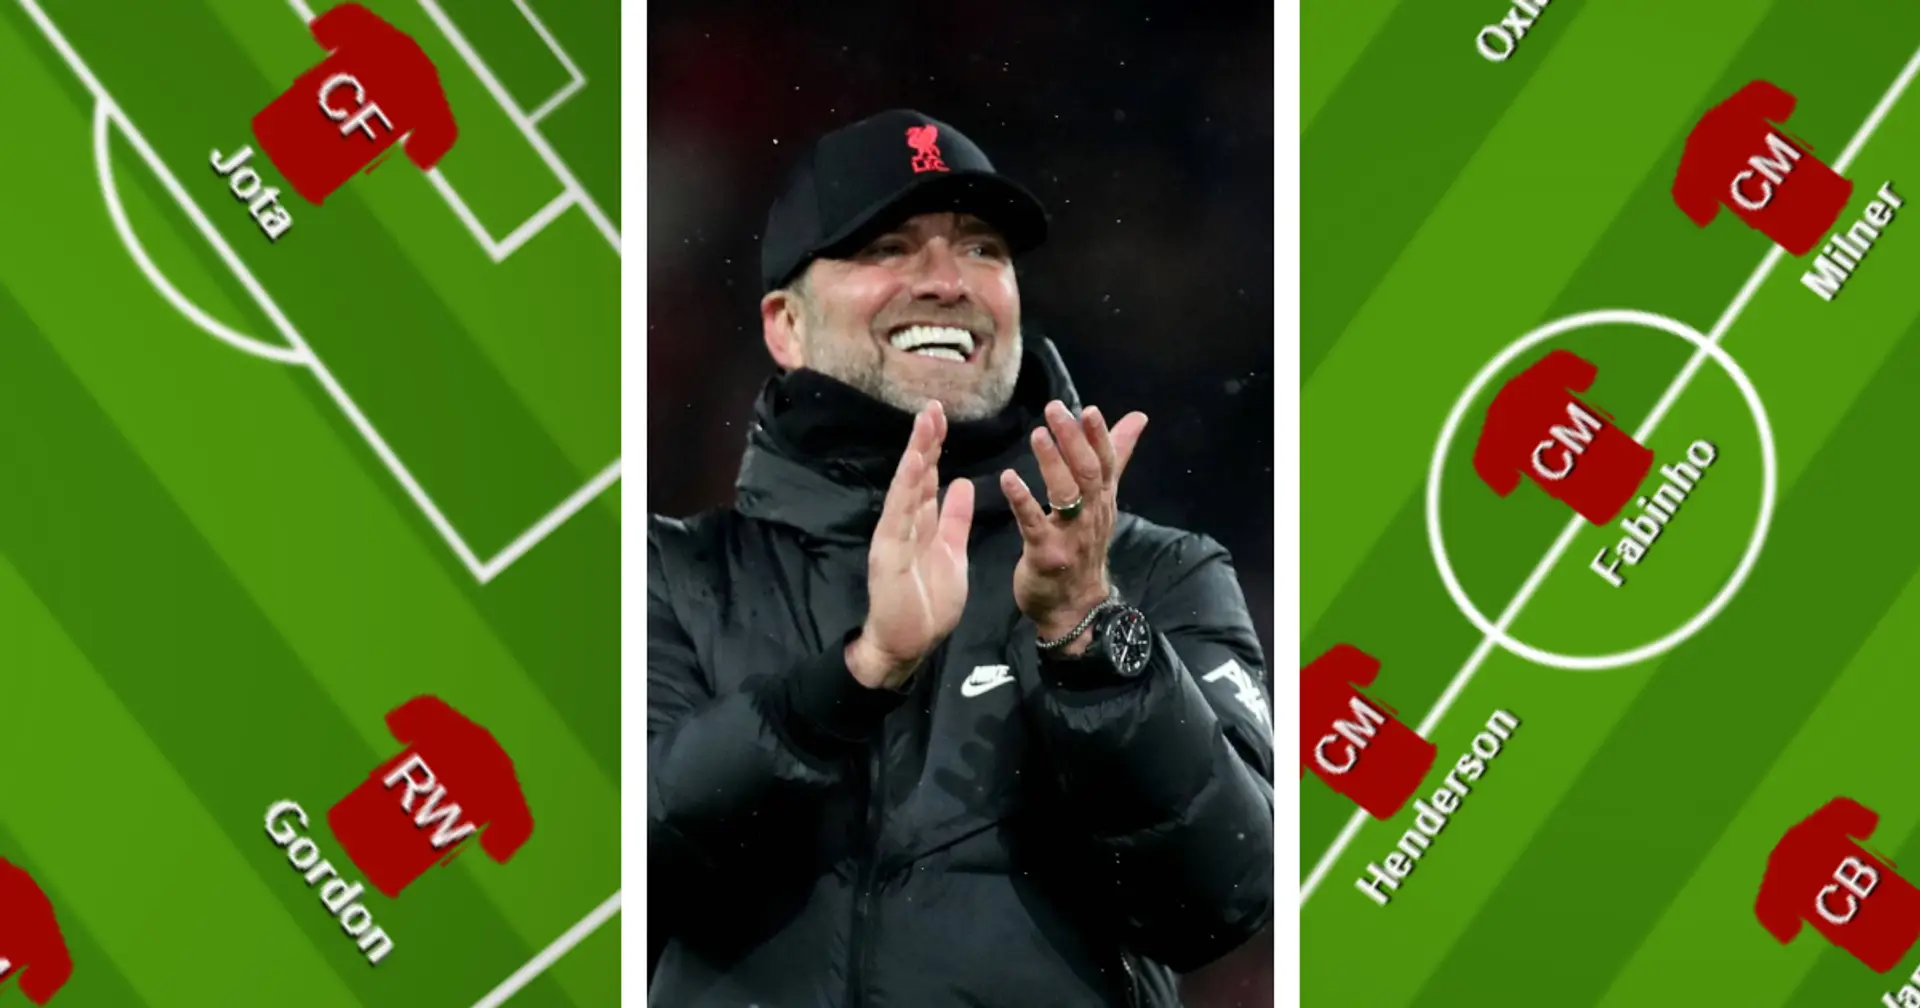 Another start for Gordon? Select your preferred Liverpool XI vs Arsenal from 2 options